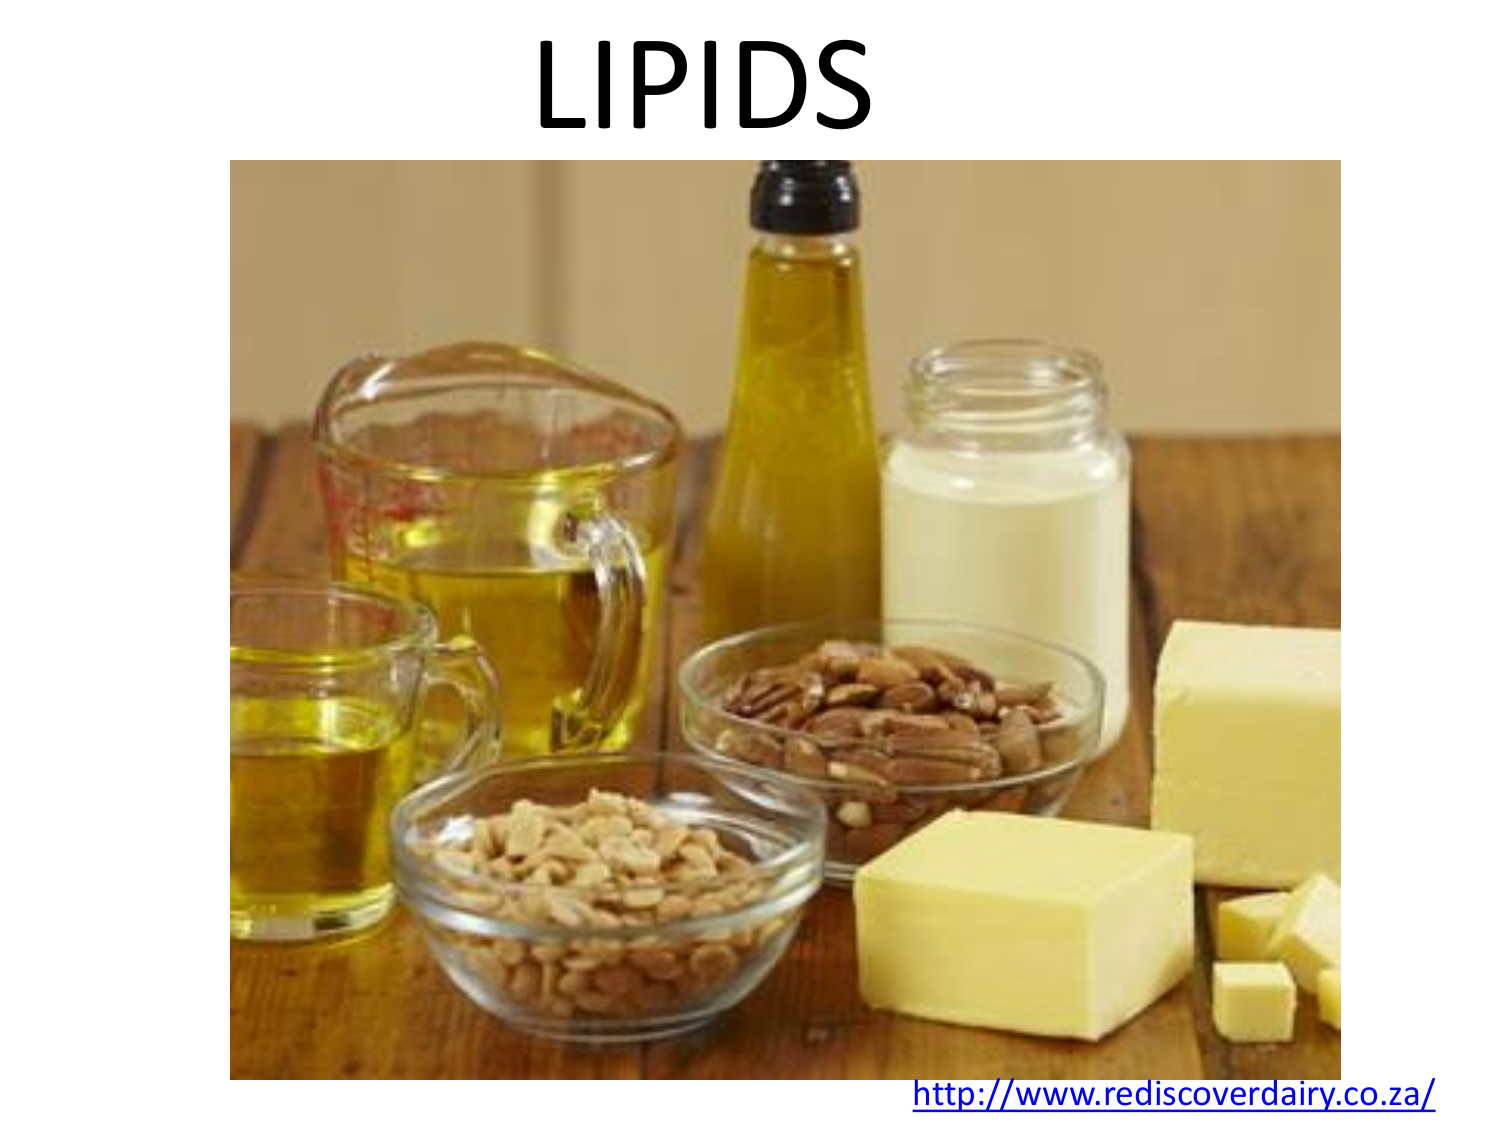 research articles about lipids